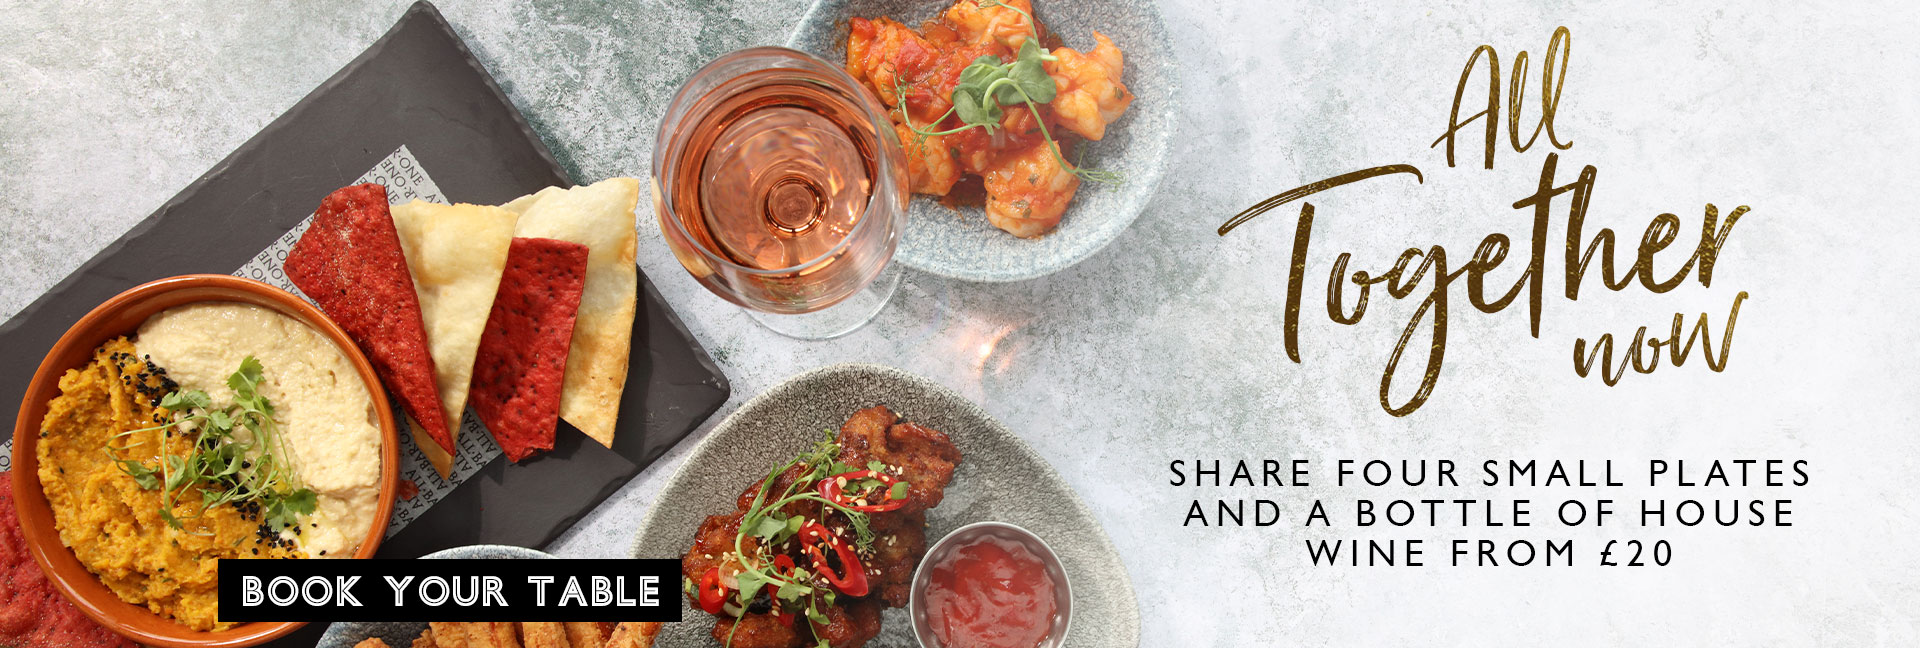 Tapas Tuesday at All Bar One - Book now